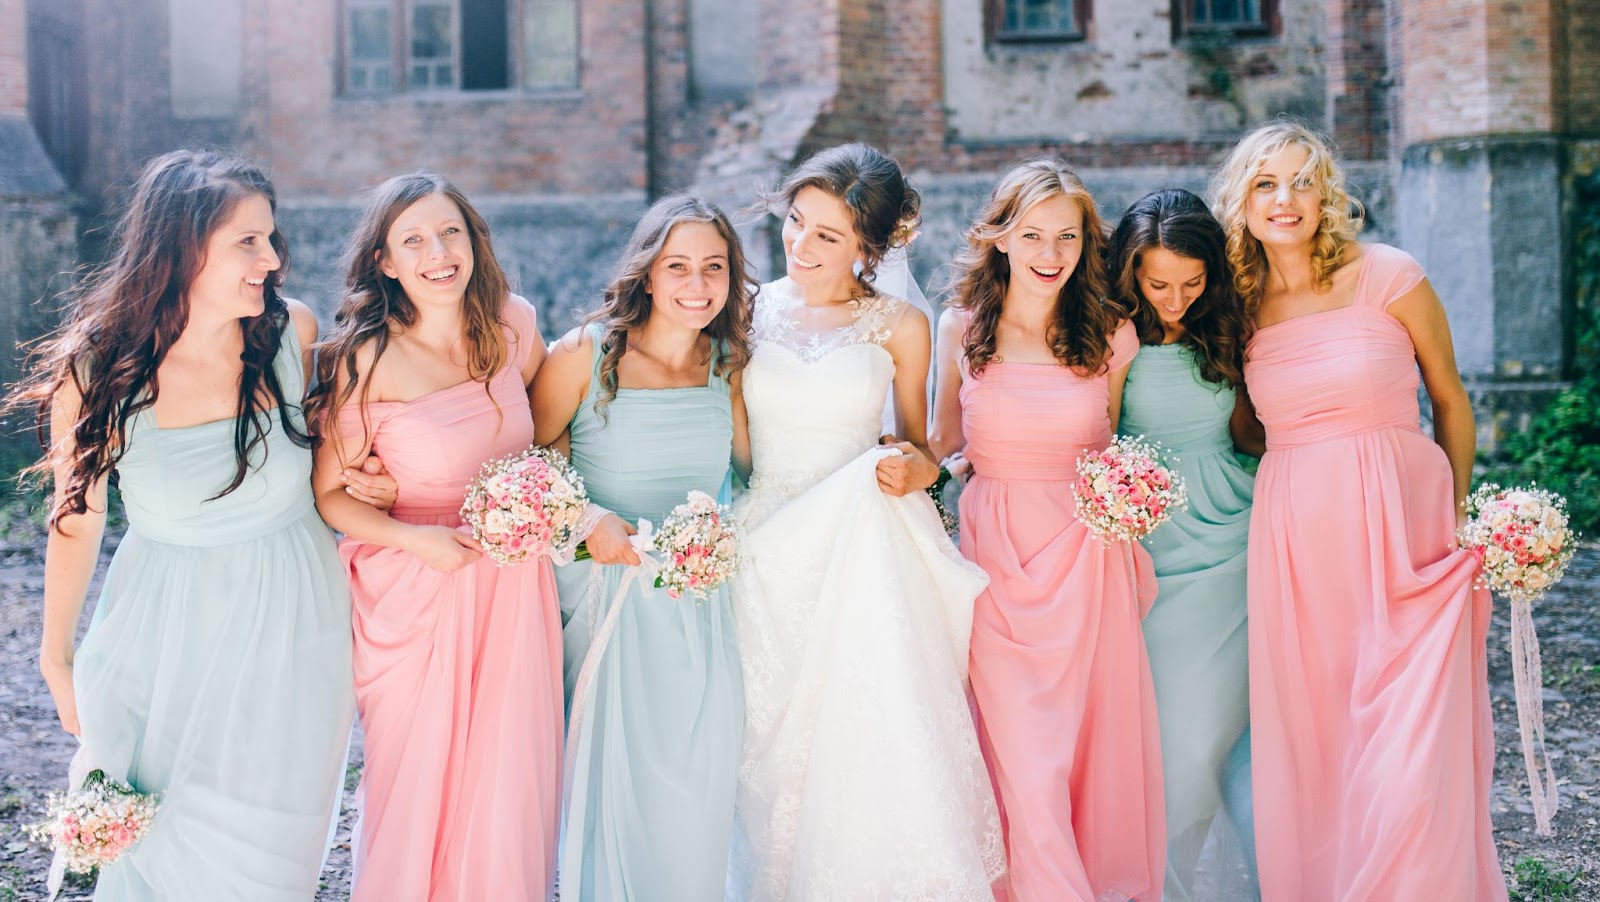 Bridesmaid Dress Styles You Don’t Want to Miss